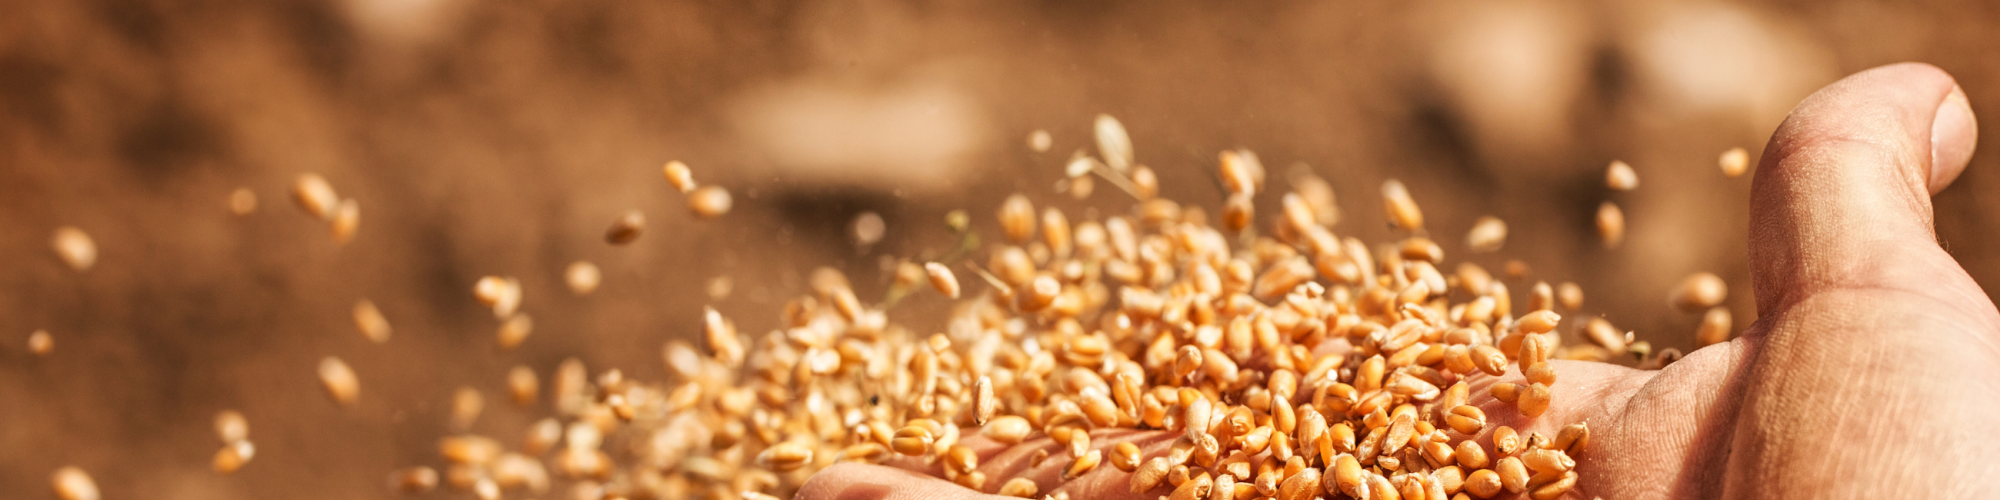 A hand letting a pile of grain slip through their fingers. Photo by tomasworks via Getty Images.